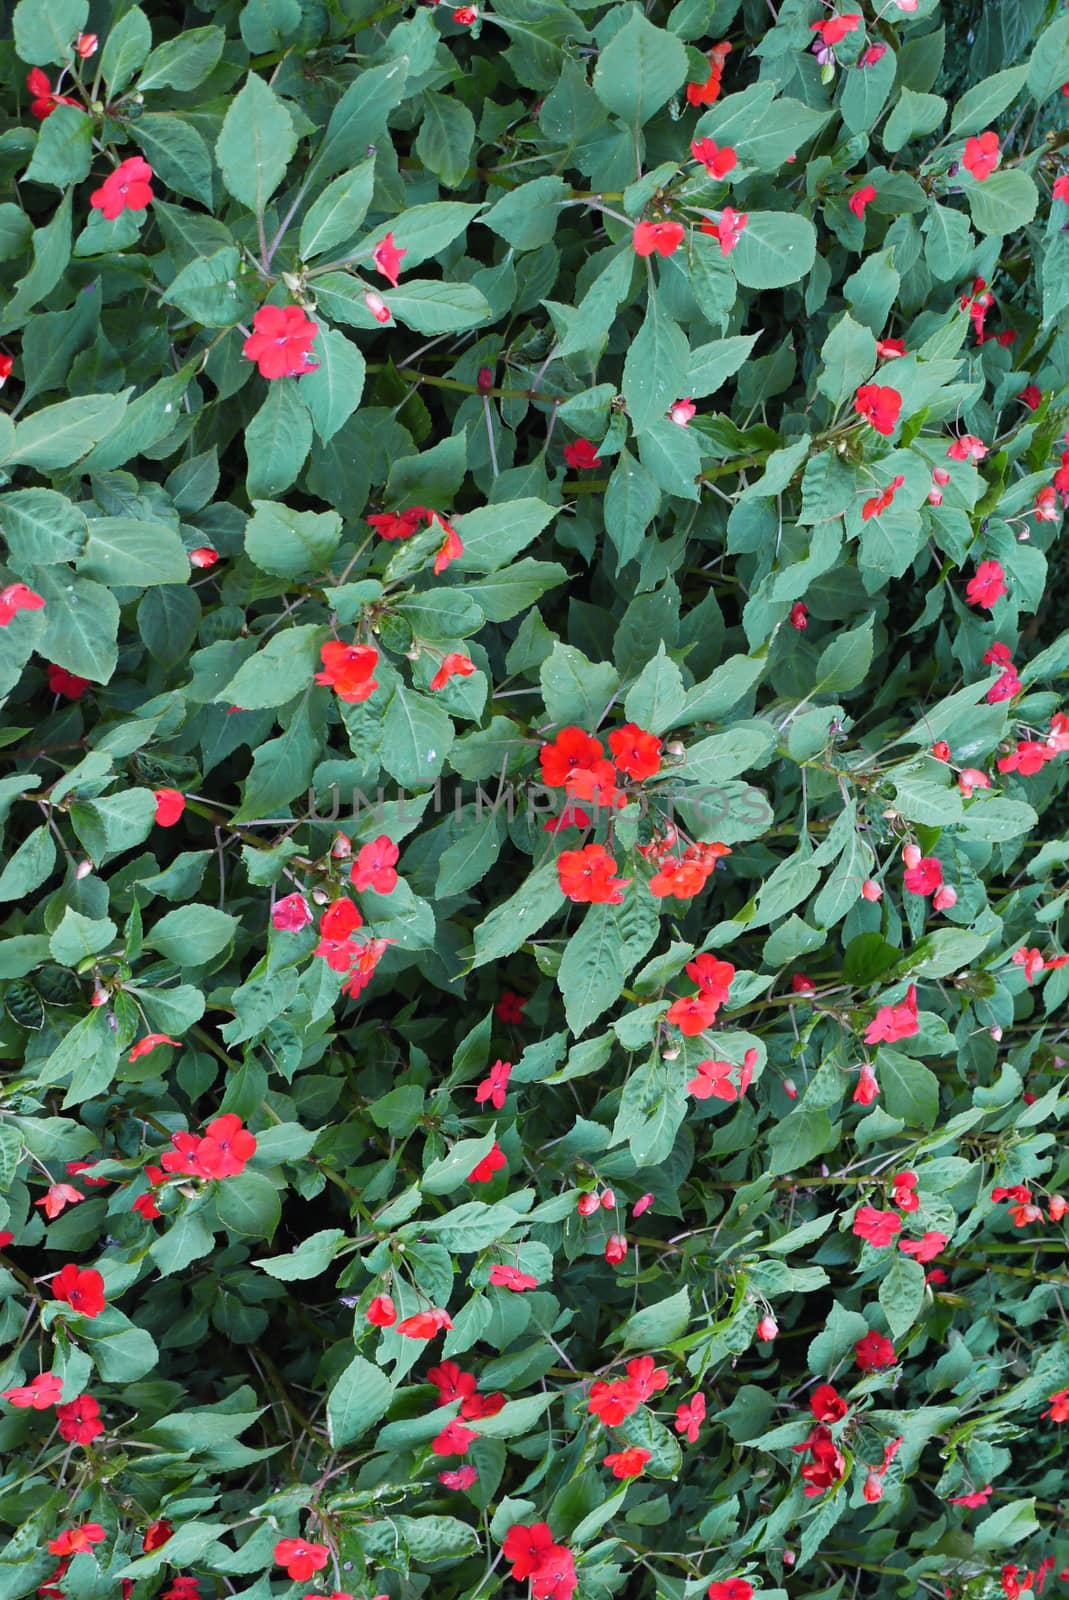 Carpet of green leaves with rare flowers with red petals. A beautiful picture of the wild.